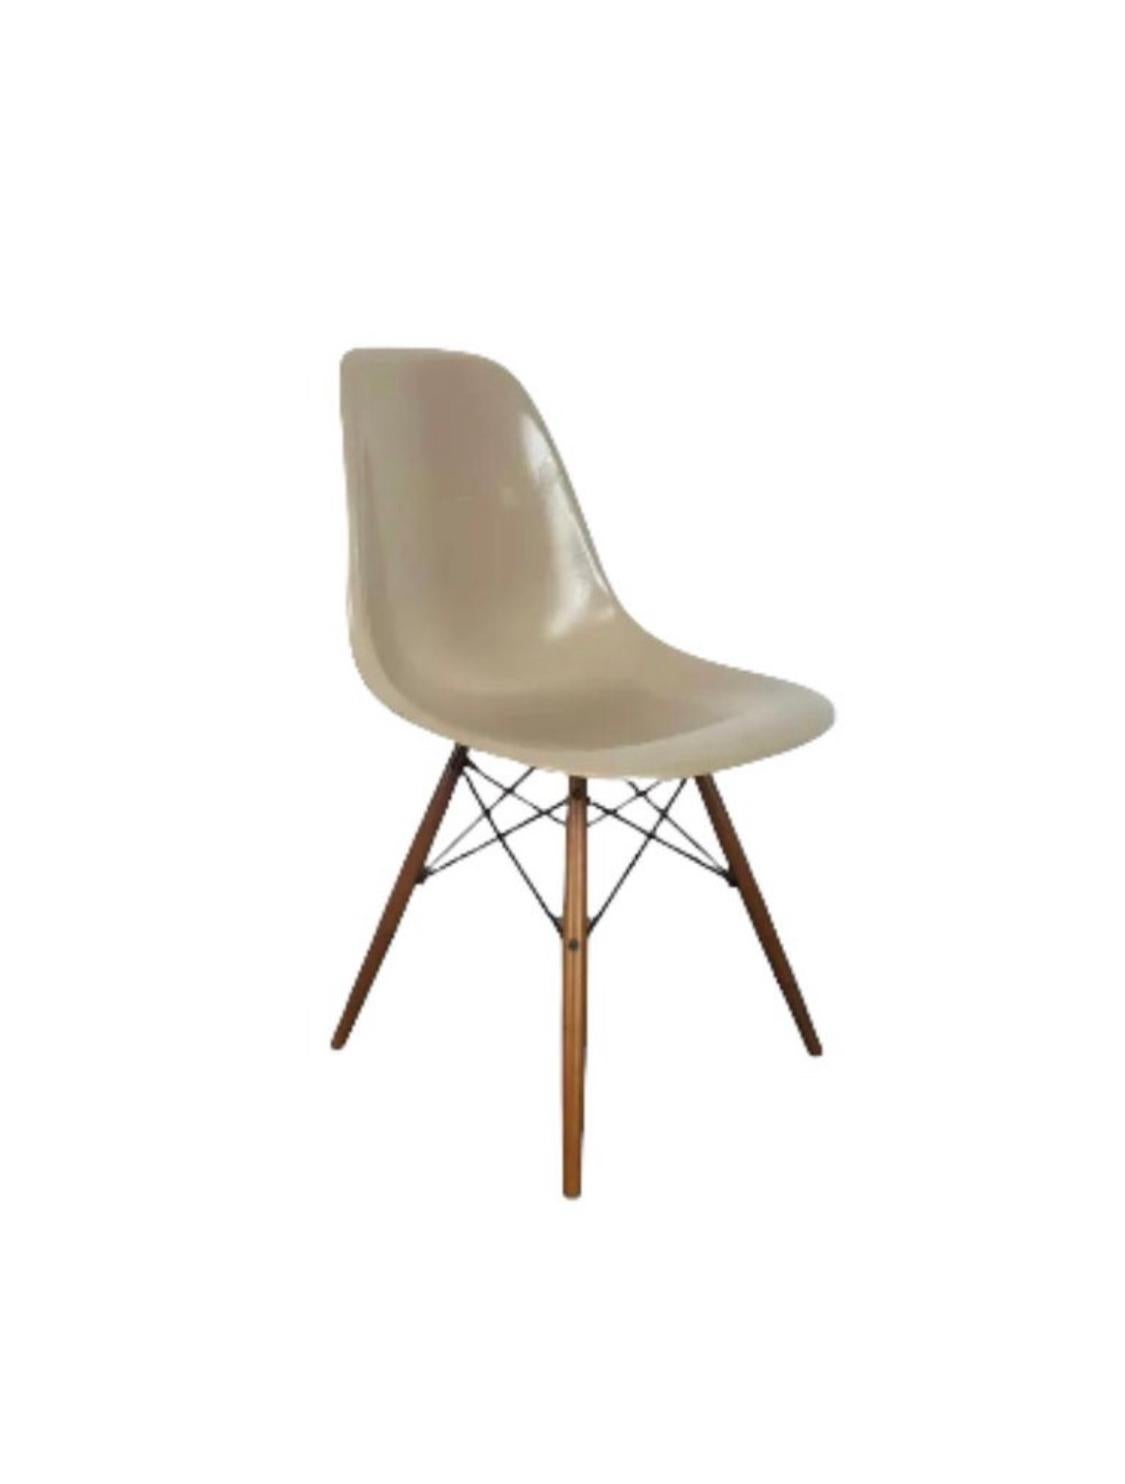 Herman Miller fiberglass dining chairs designed by Charles and Ray Eames. All in matching beige color, which is elegant and complements all decor and color schemes. Signed and guaranteed authentic. Complete with wooden dowel bases. Ships